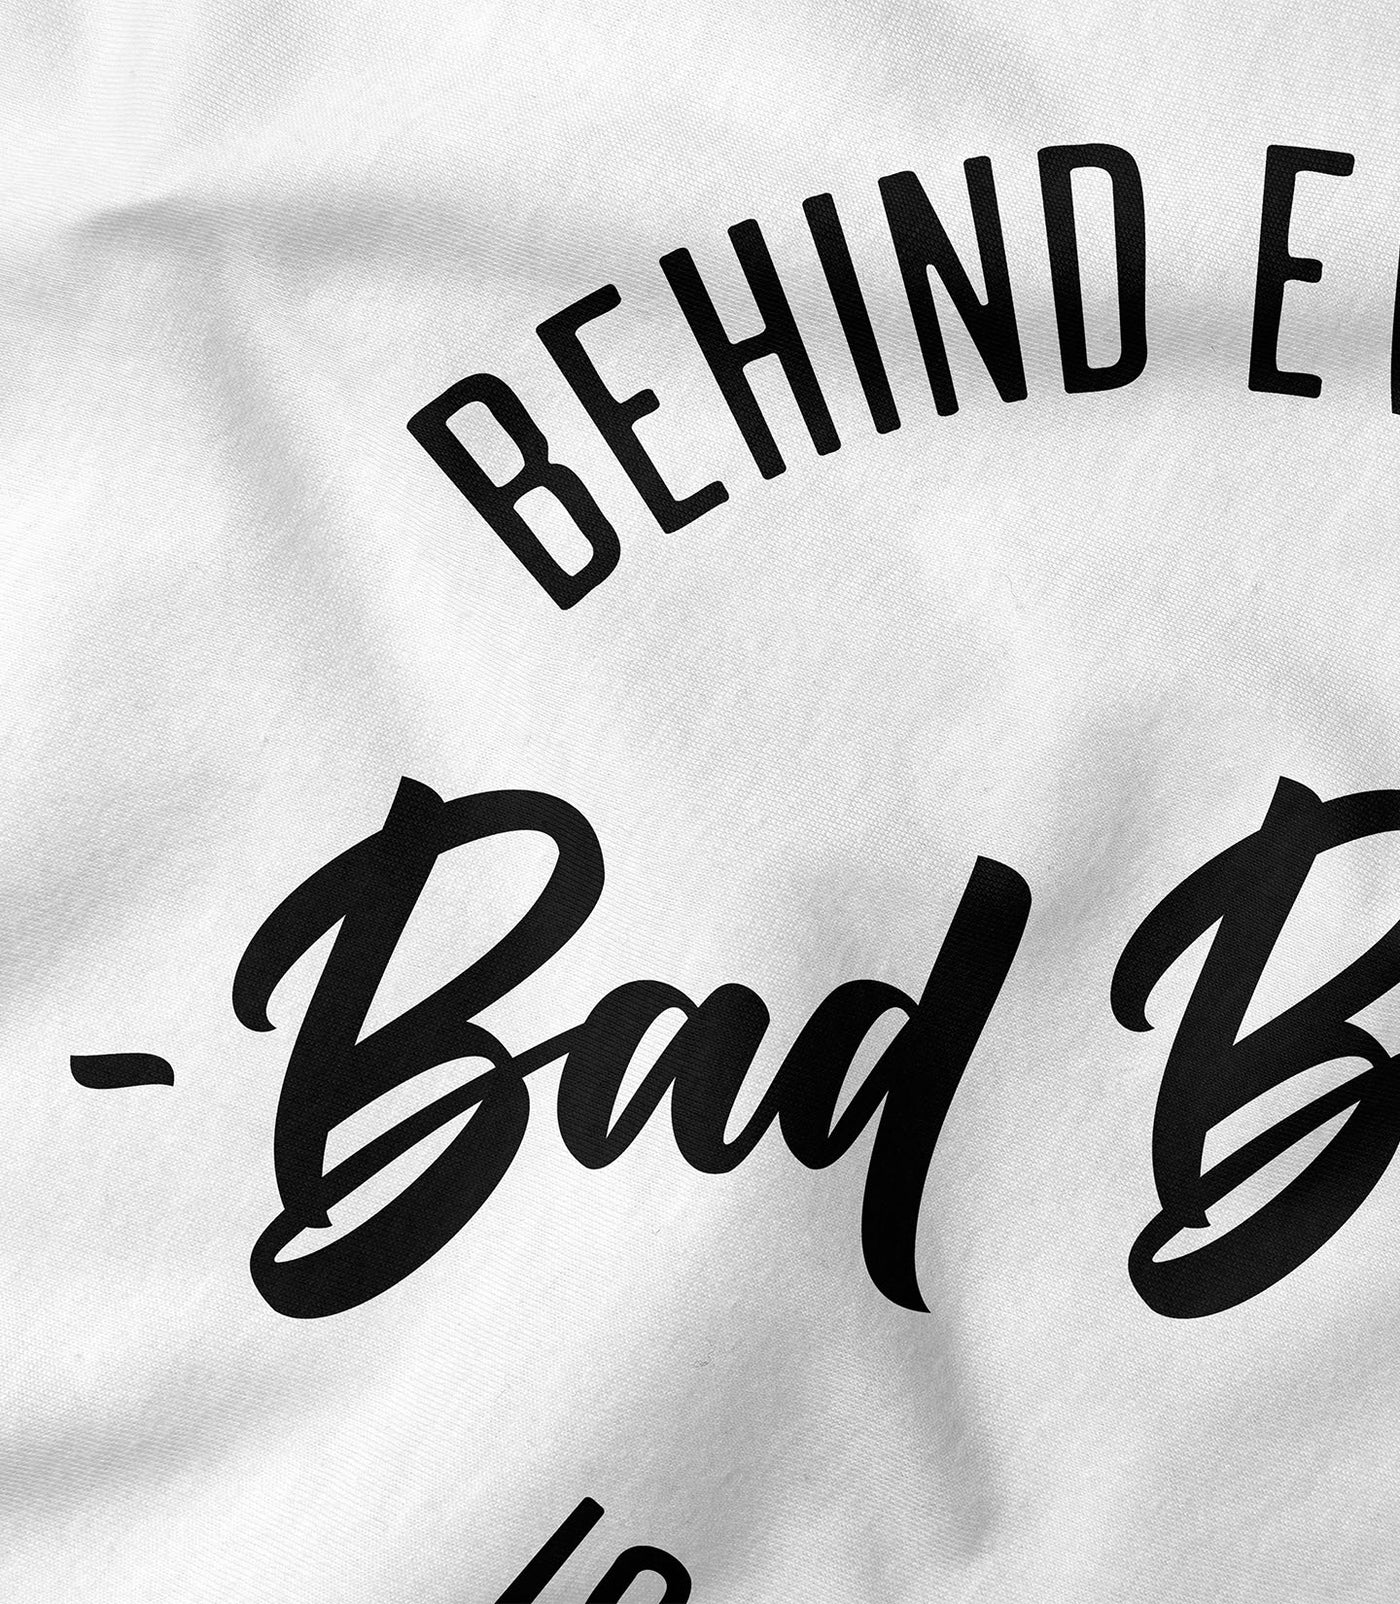 Behind Every Bad Bitch is a Car Seat Tee